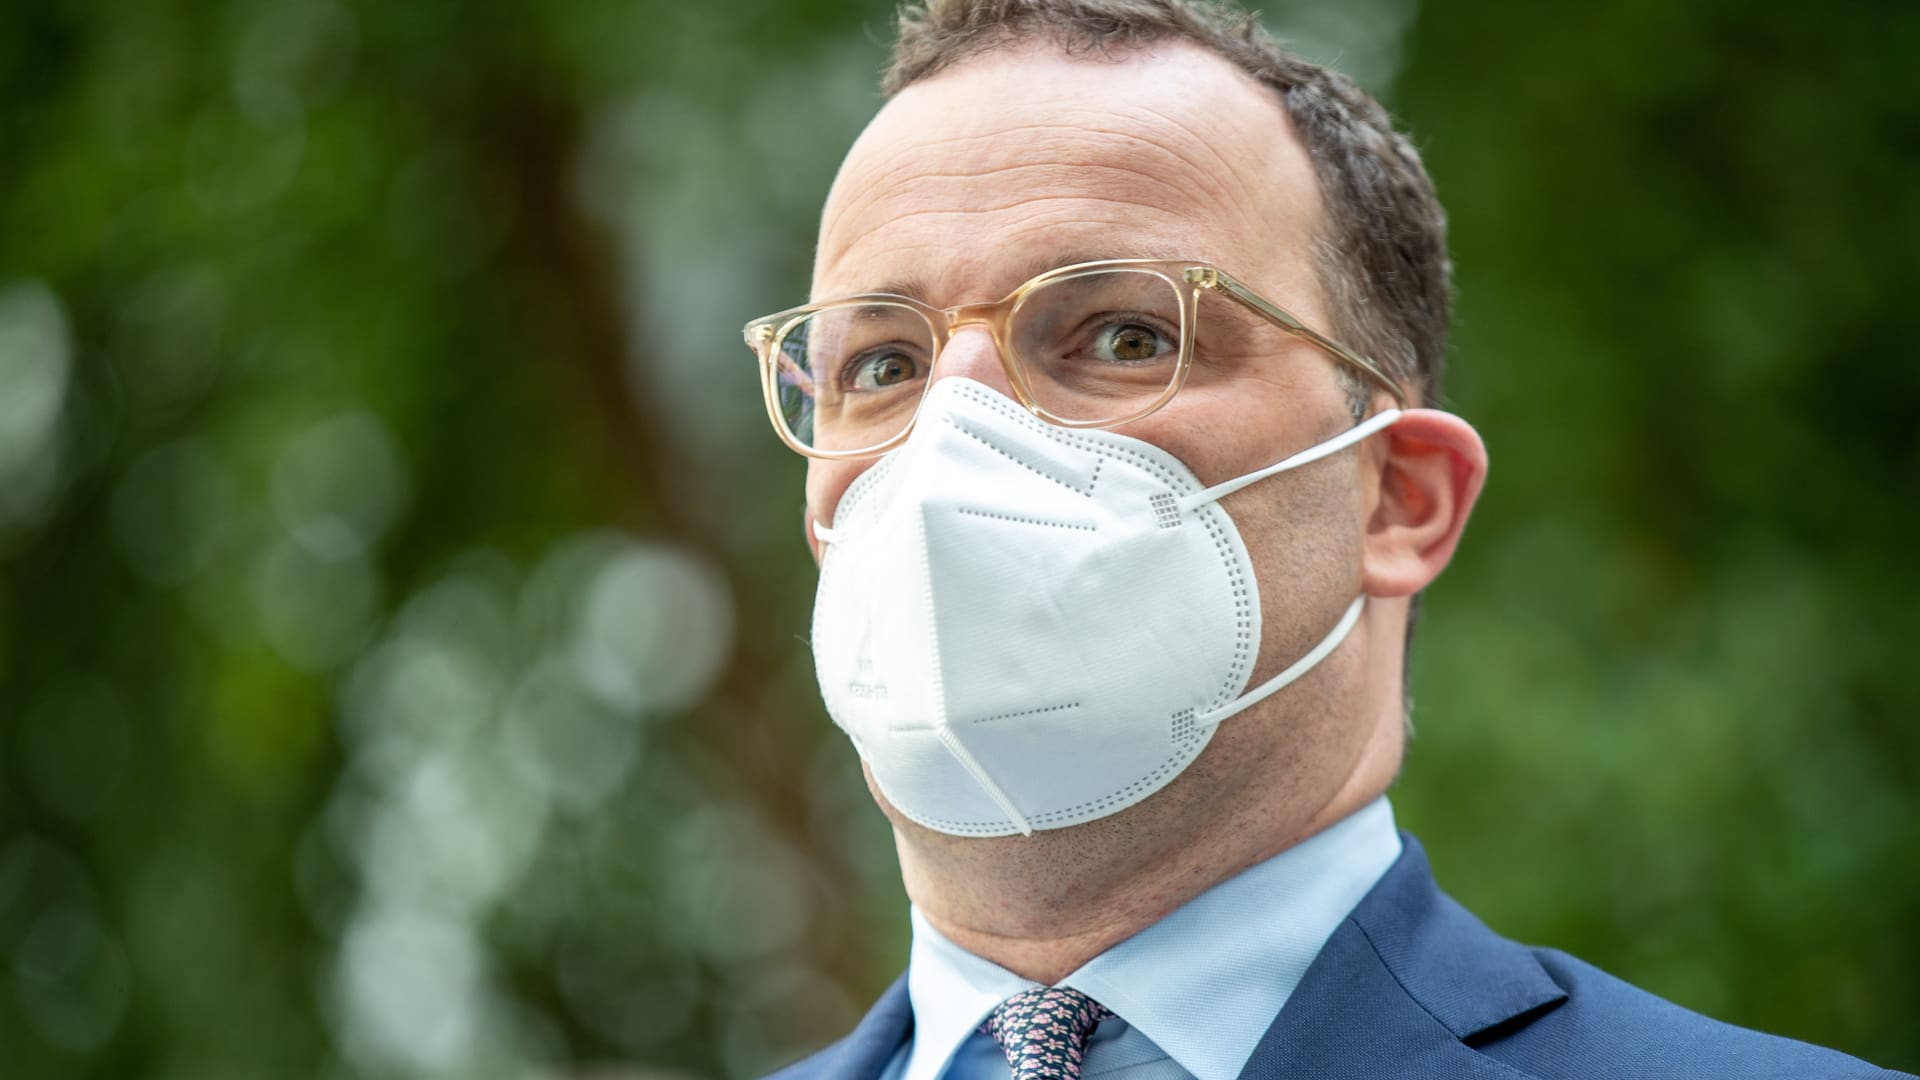 Jens Spahn, Federal Minister of Health, on the way to the presentation of the National Reserve Health Protection in the federal press conference on July 21, 2021 in Berlin, Germany.